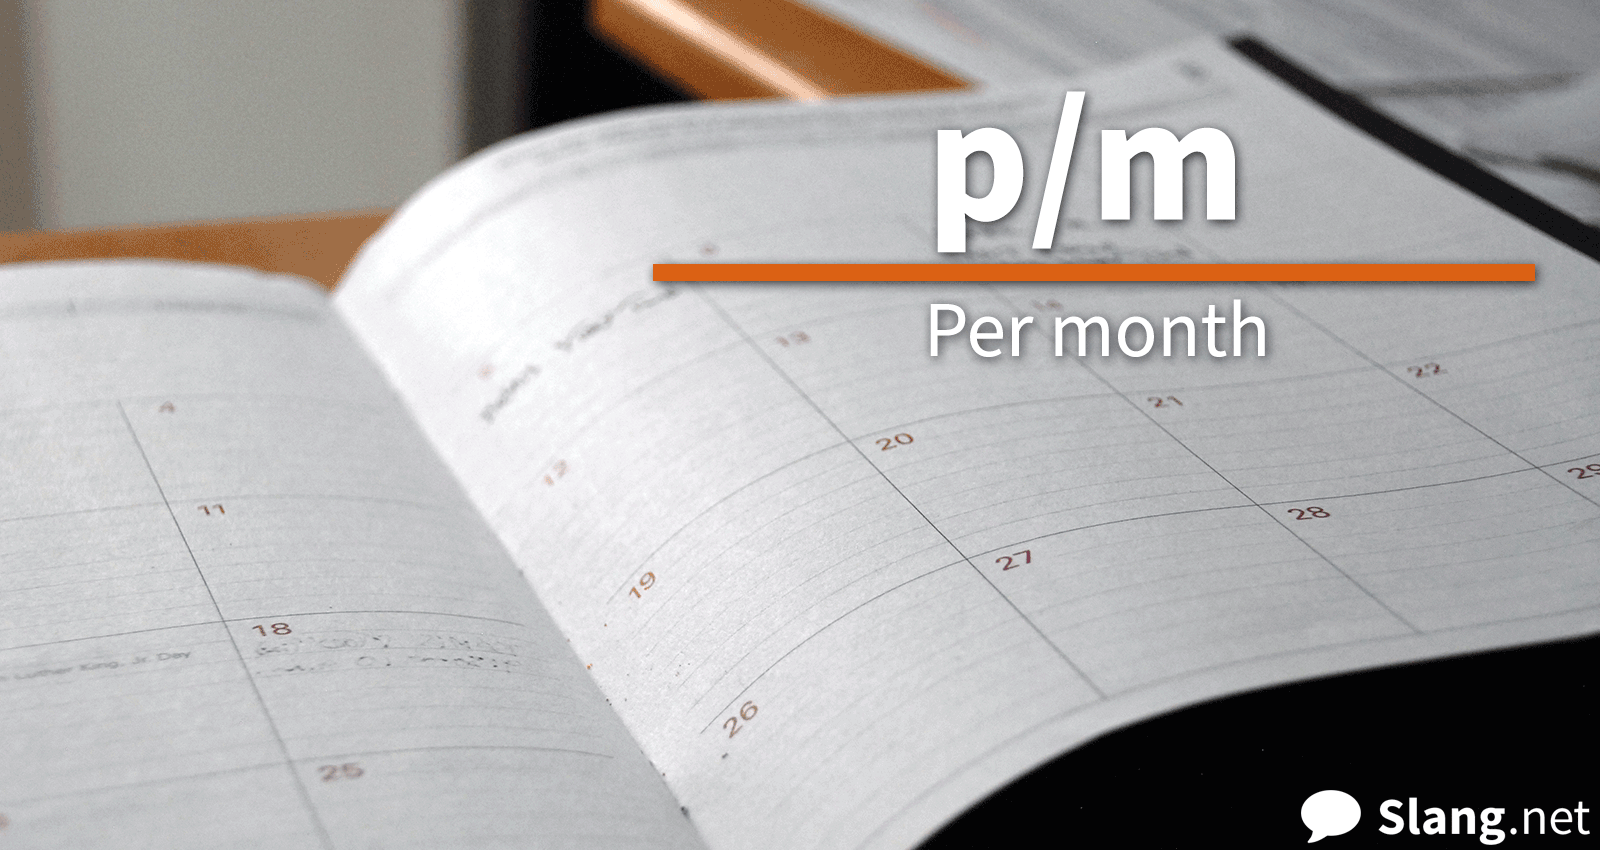 P/m stands for &quot;per month&quot;